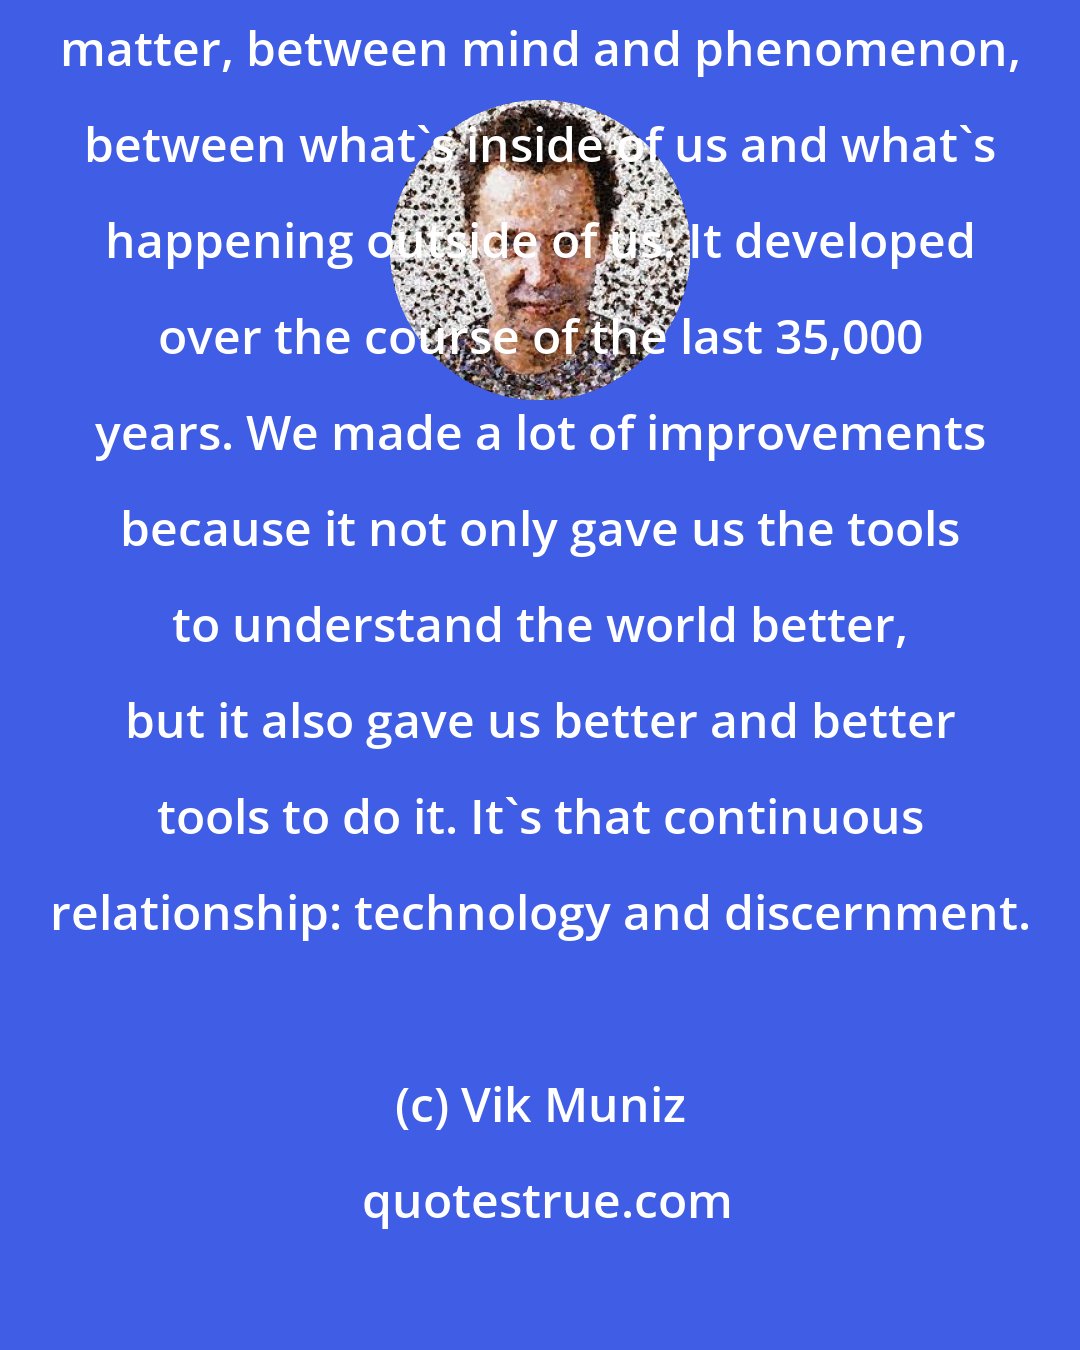 Vik Muniz: I think art is the development of this interface between mind and matter, between mind and phenomenon, between what's inside of us and what's happening outside of us. It developed over the course of the last 35,000 years. We made a lot of improvements because it not only gave us the tools to understand the world better, but it also gave us better and better tools to do it. It's that continuous relationship: technology and discernment.